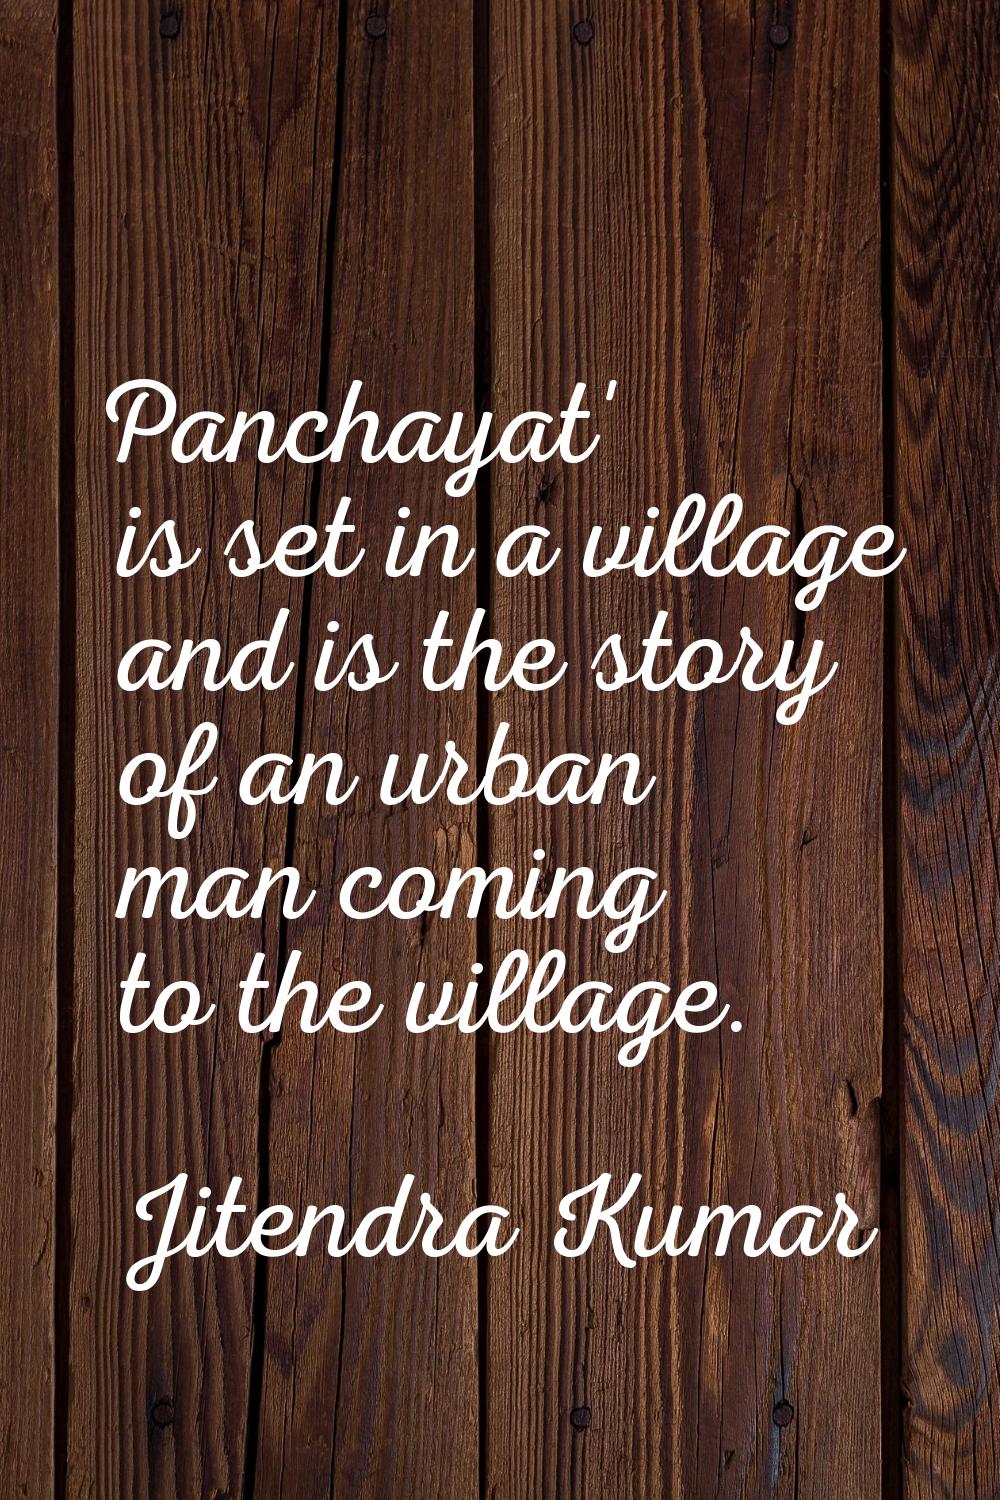 Panchayat' is set in a village and is the story of an urban man coming to the village.